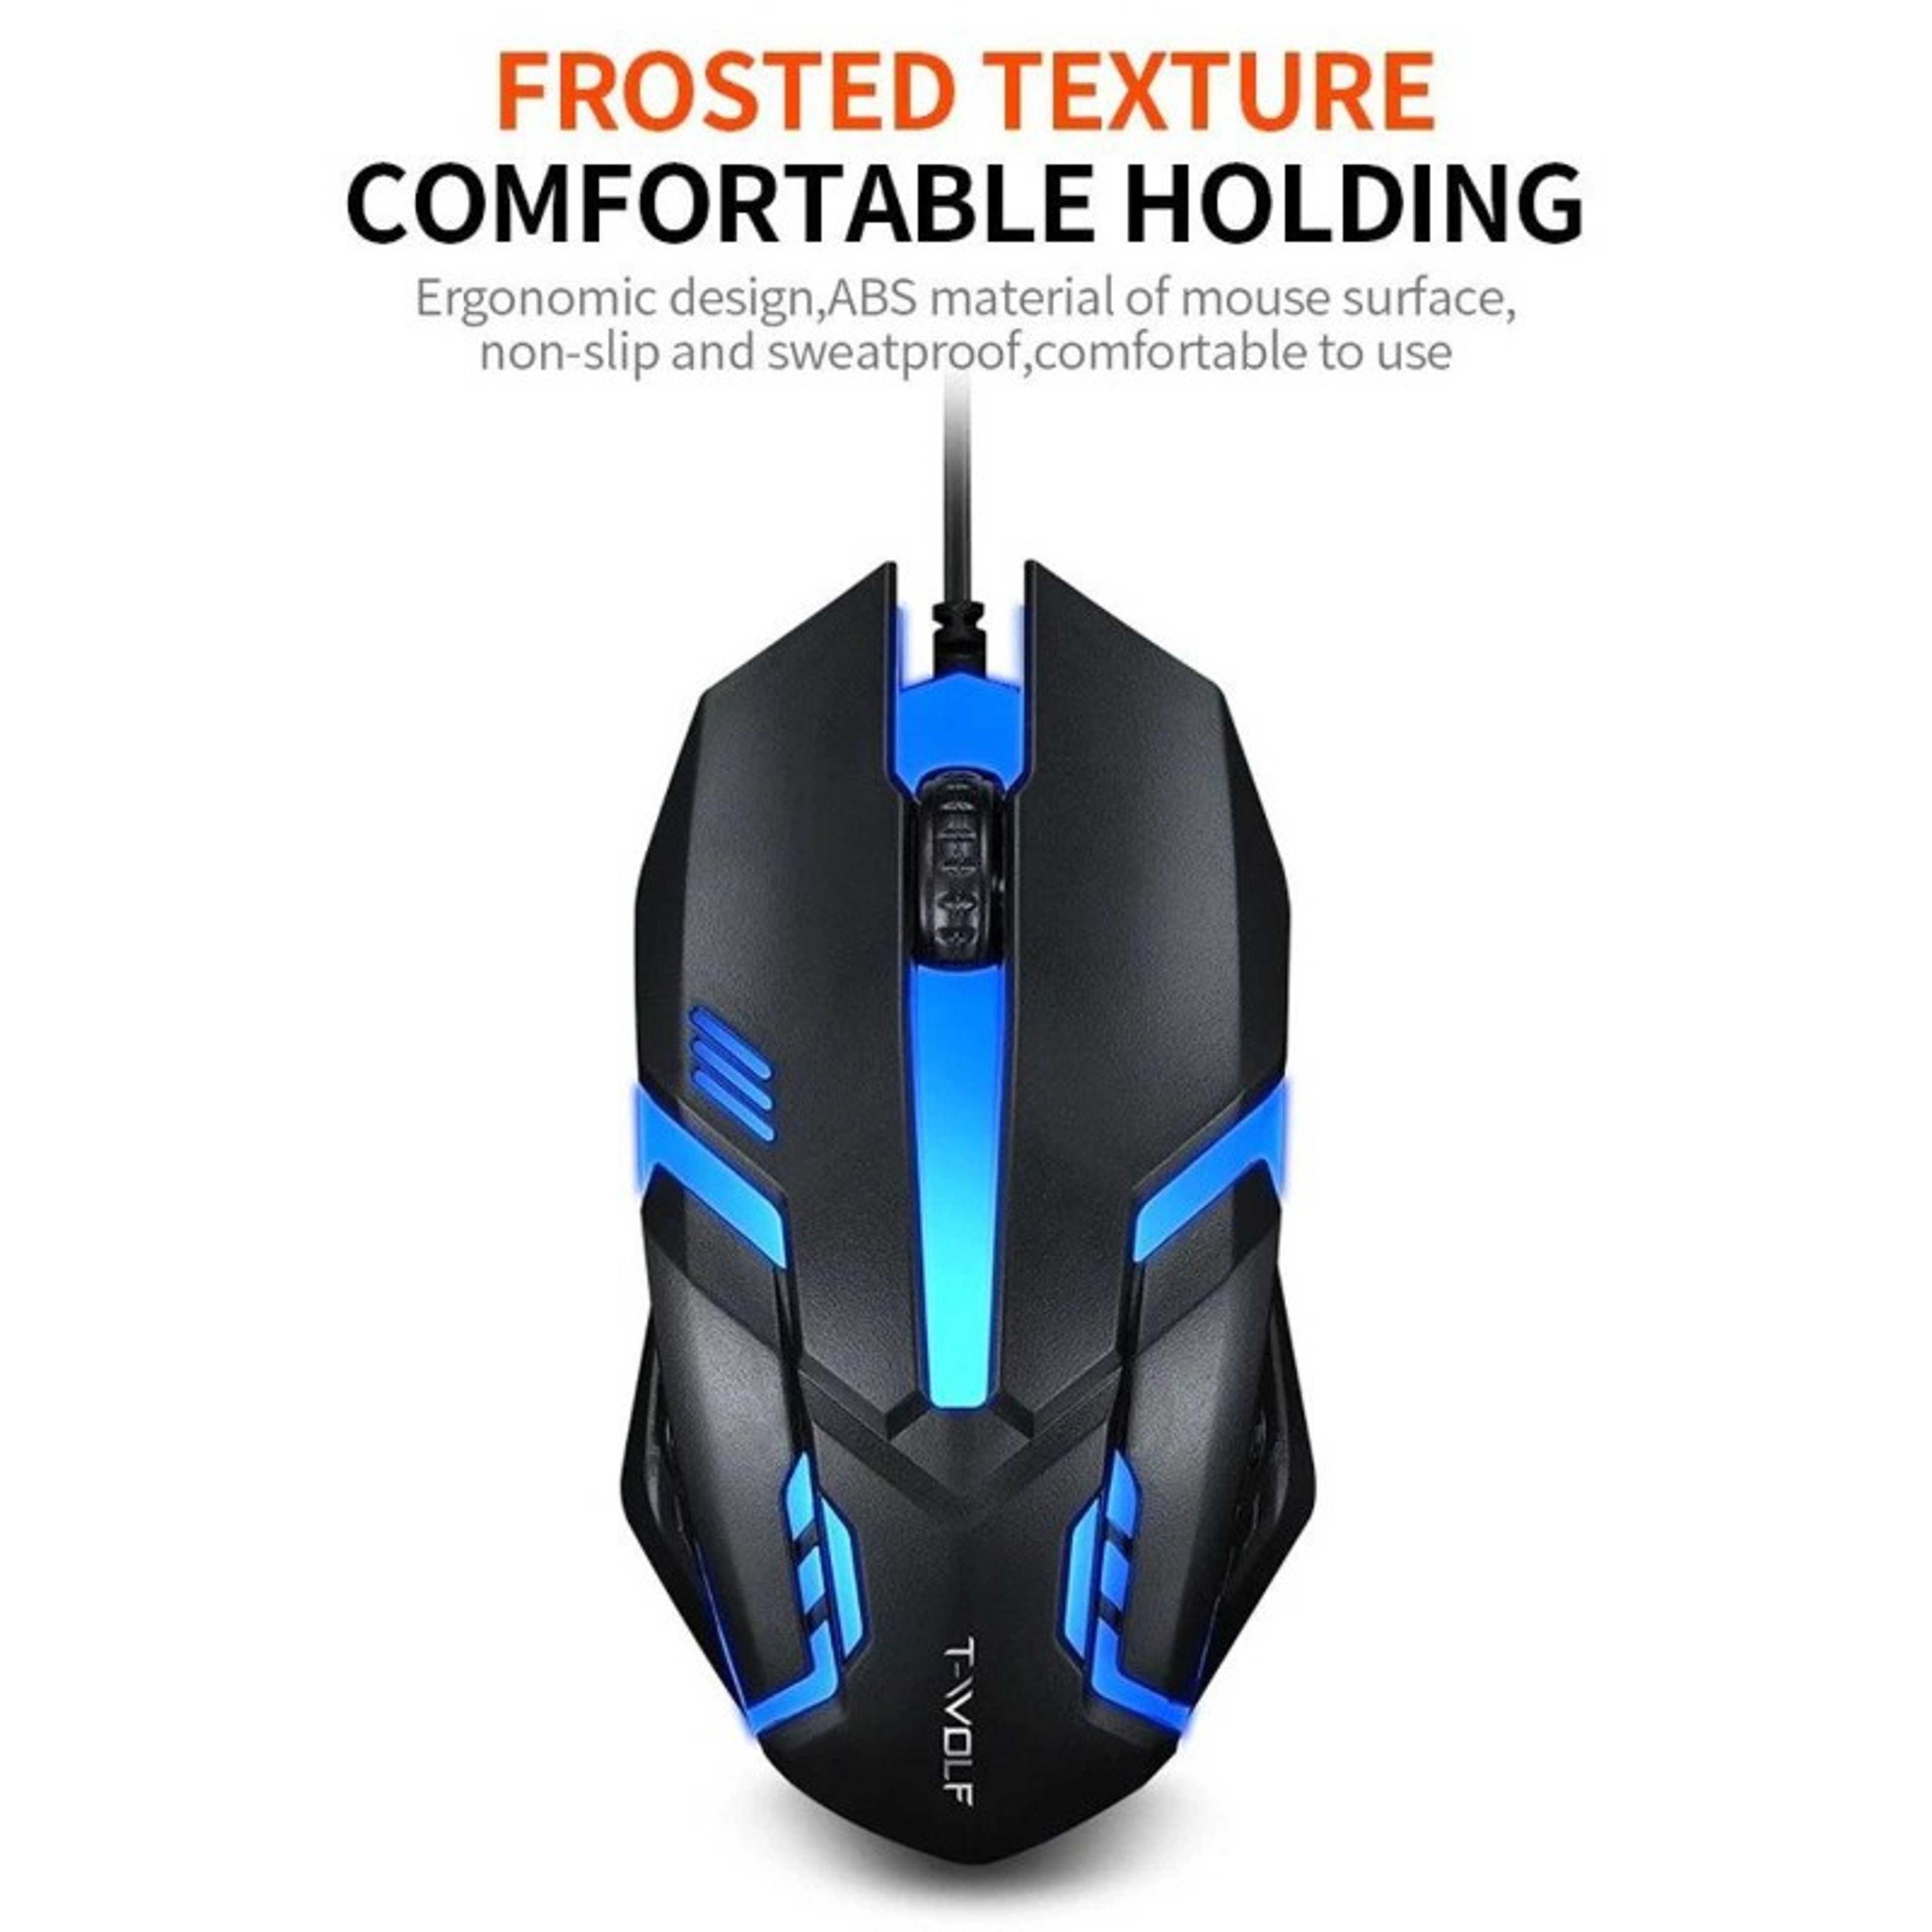 RGB Mouse 7 light breathing gaming mouse RGB cheap with- Gaming Mouse with 7 led - USB wired without side buttons for PC, Laptop, Minecraft, Mobile Pubg, Free Fire⭐⭐⭐⭐⭐